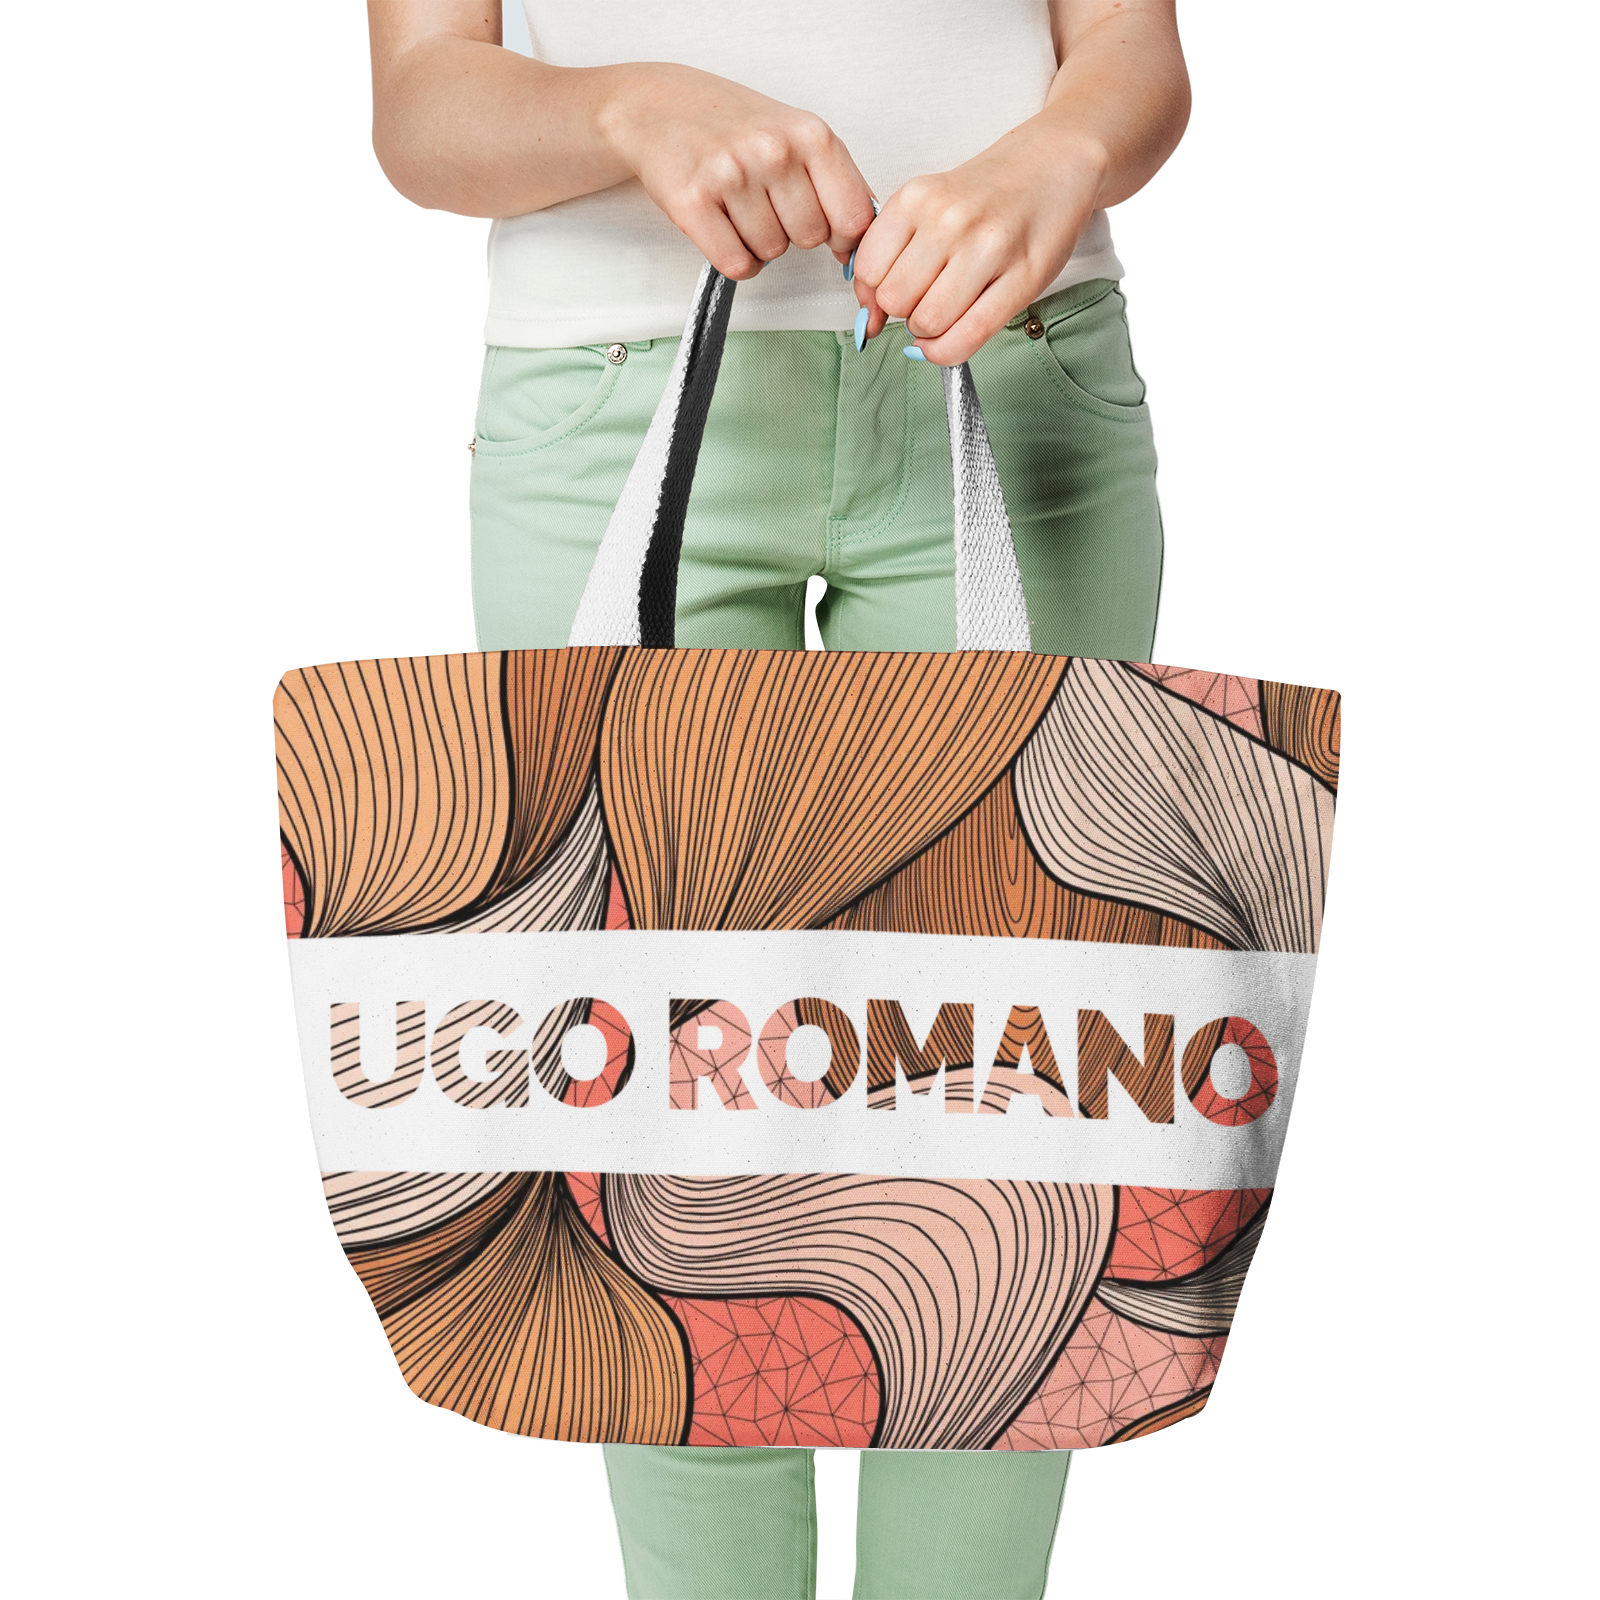 Heavy Duty and Strong Natural Cotton Canvas Tote Bag - UGO ROMANO URTB057